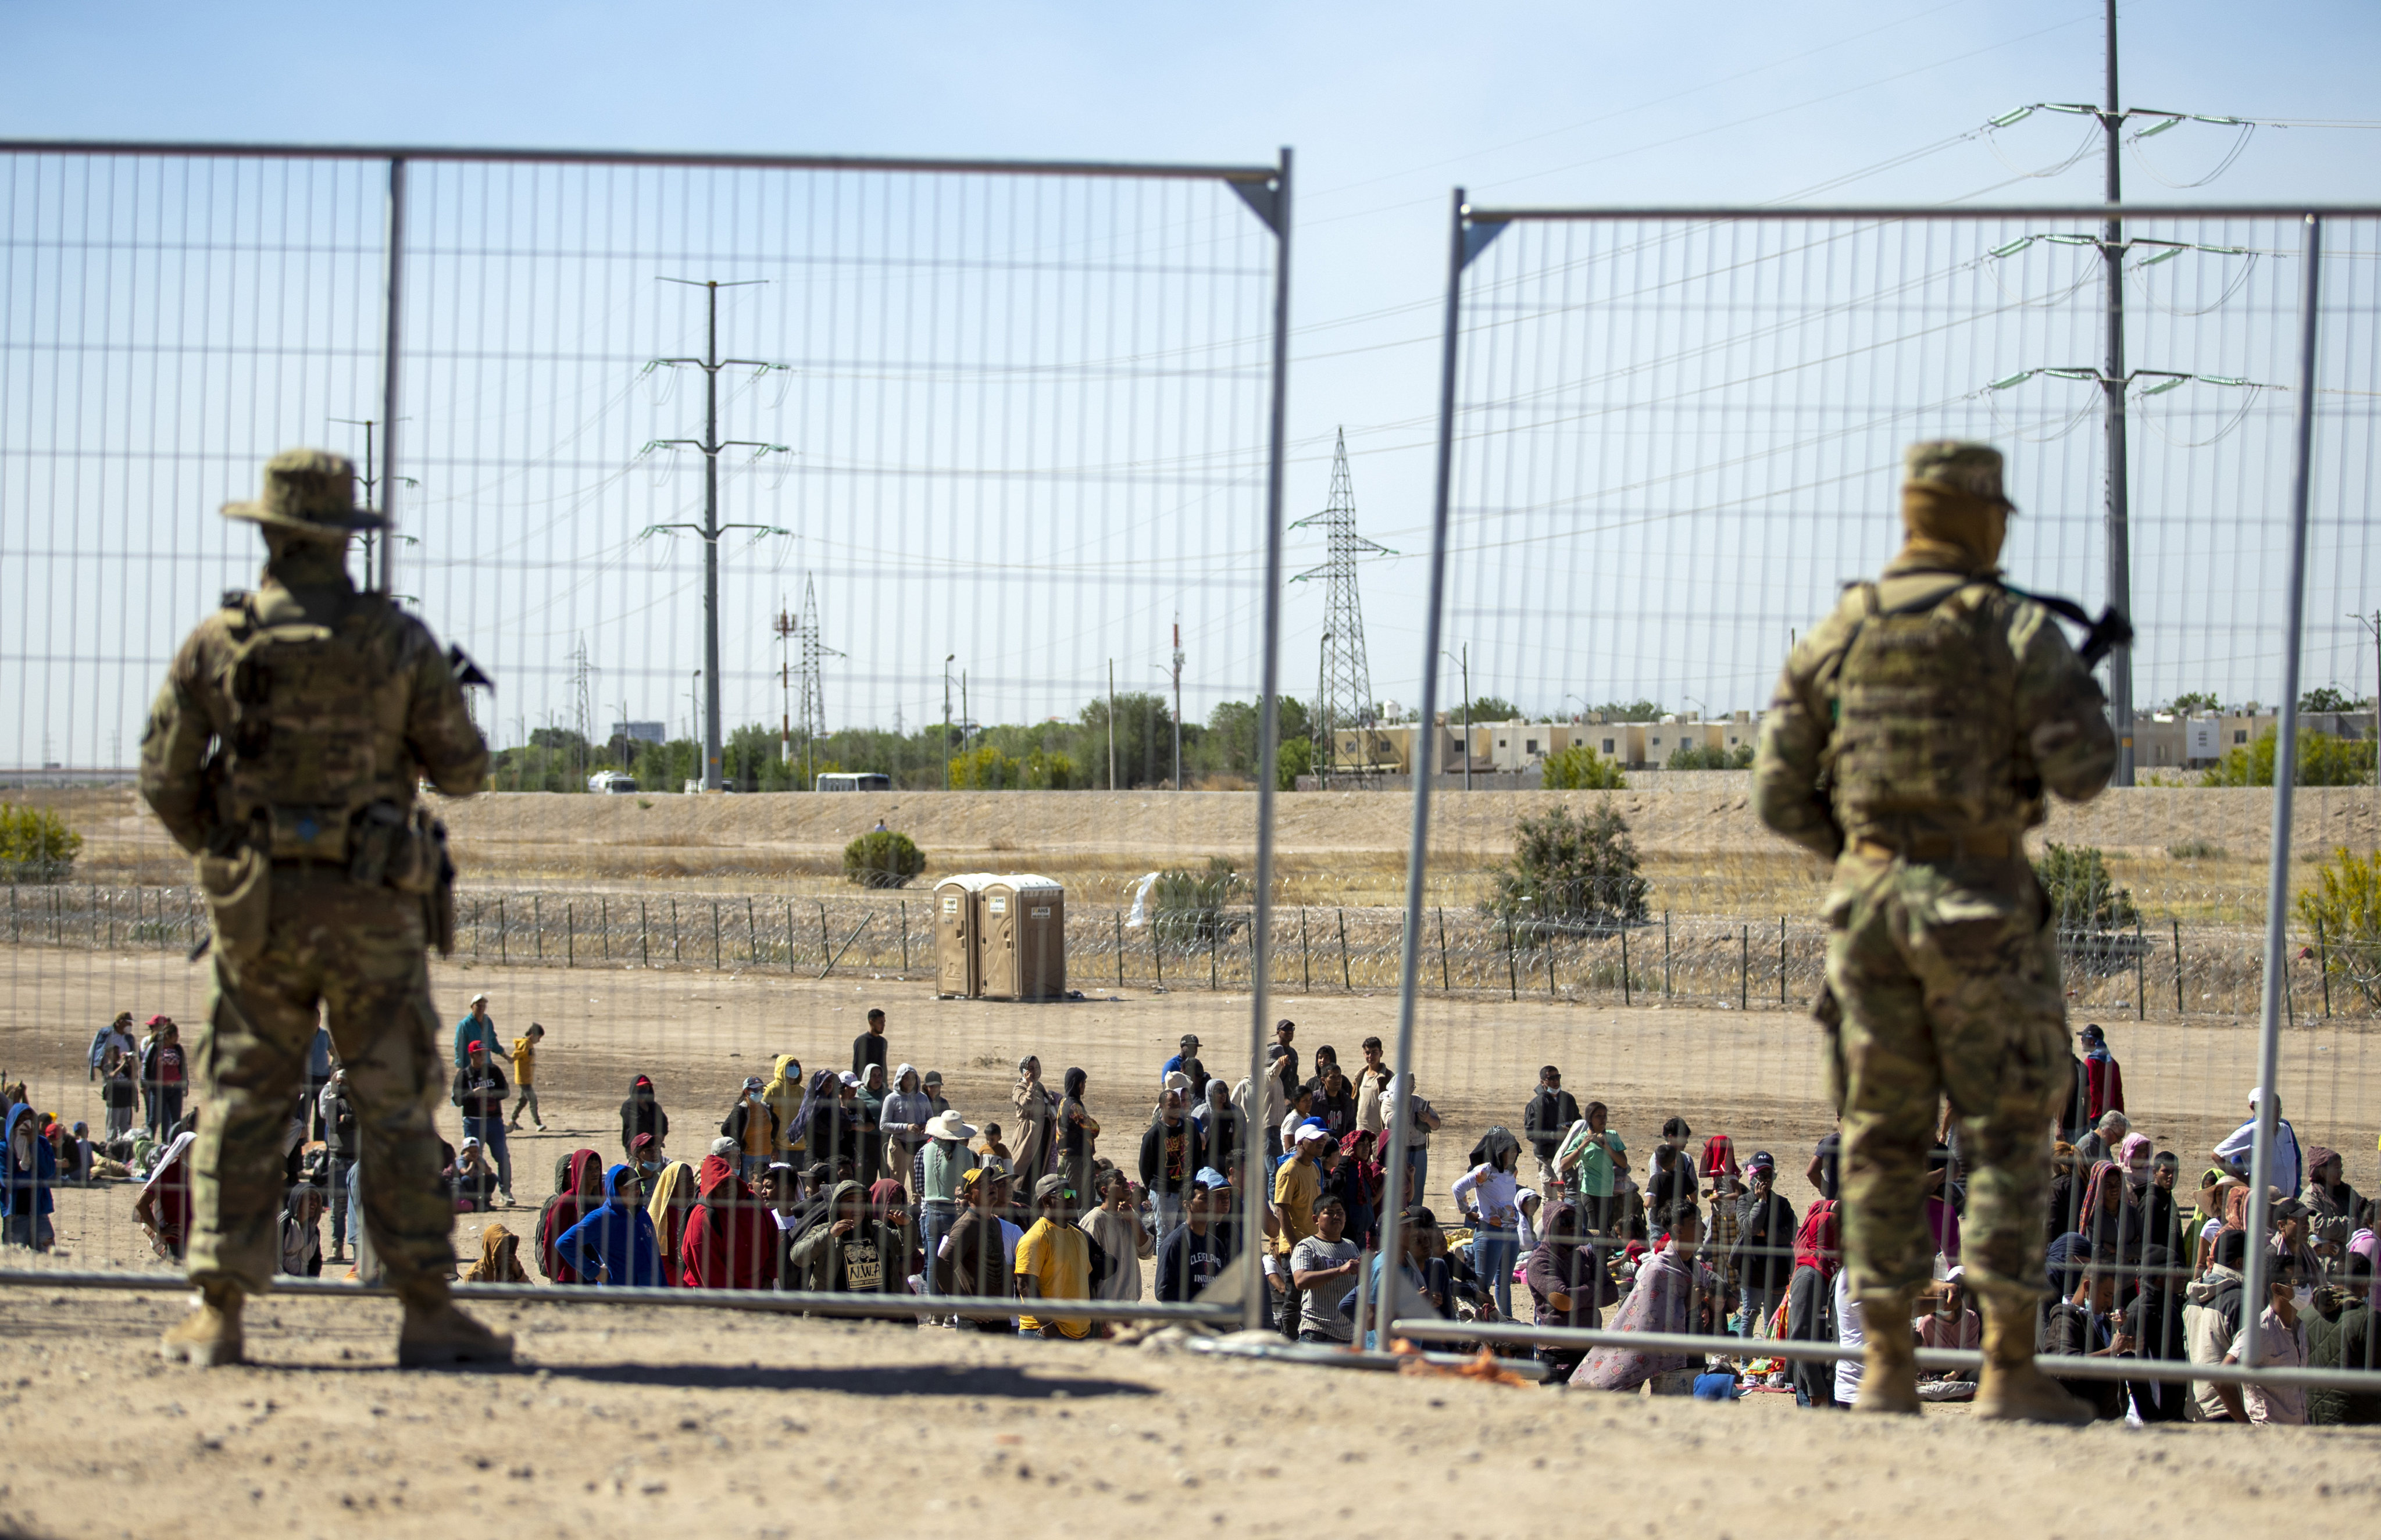 Migrants wait to enter into El Paso, Texas, under the watch of the Texas National Guard. File photo: AP